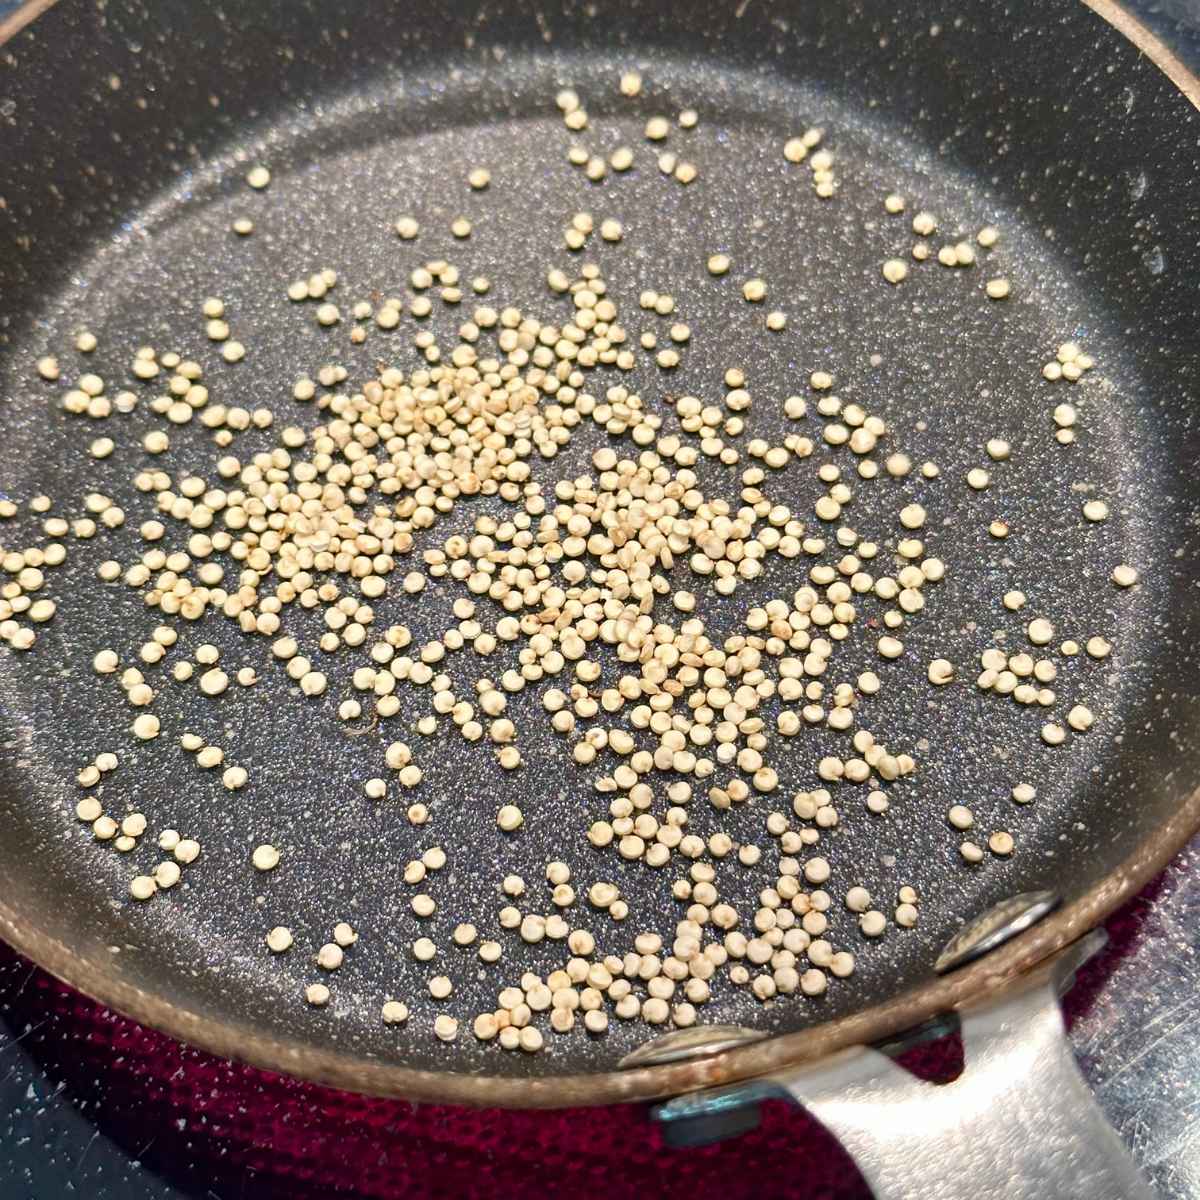 Quinoa toasting in small 5.5" granite pan on stove. Burner is red underneath the pan.